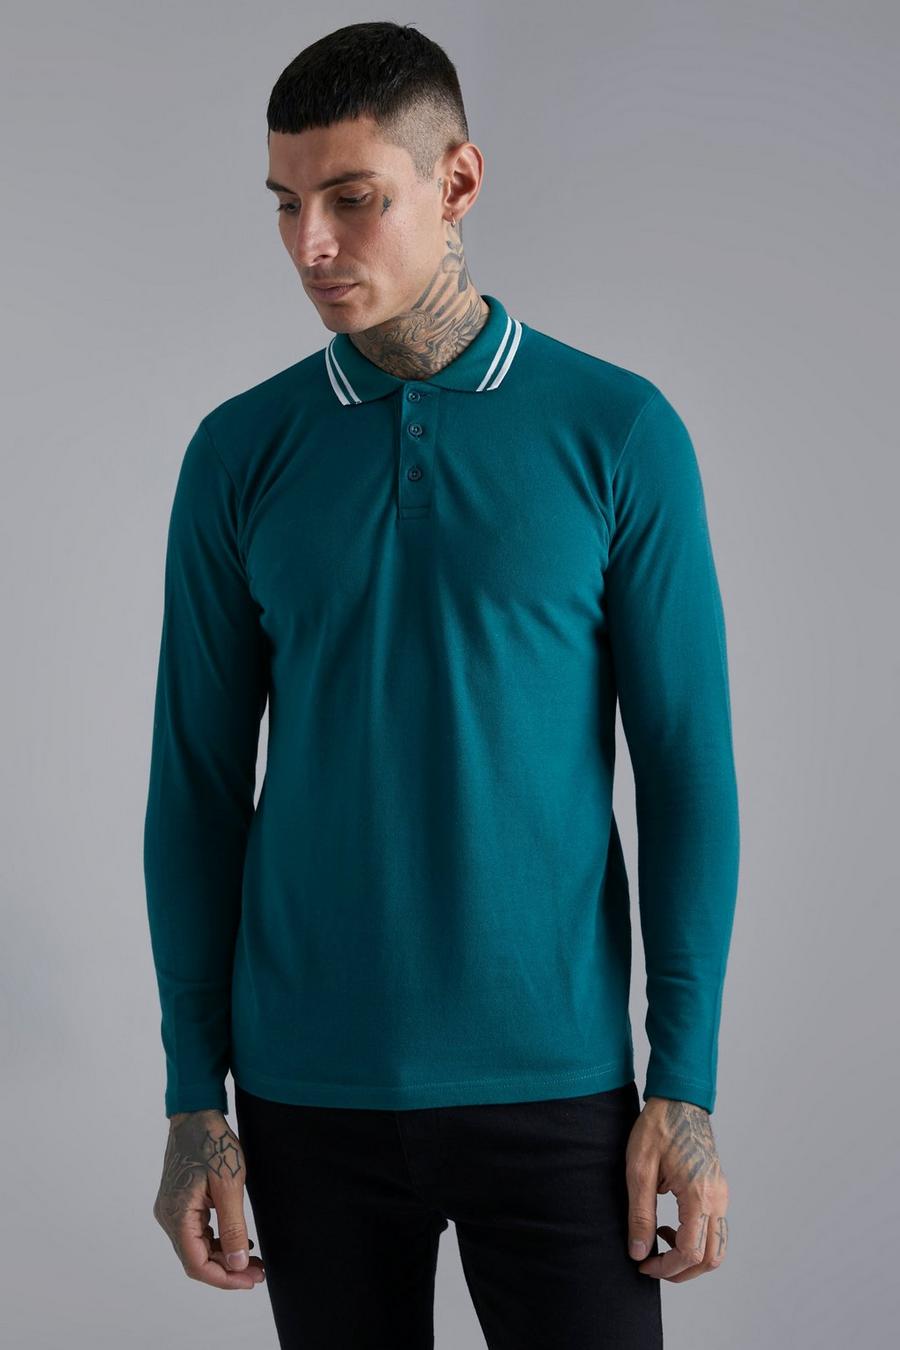 Teal gerde Long Sleeve Tipped Pique Polo